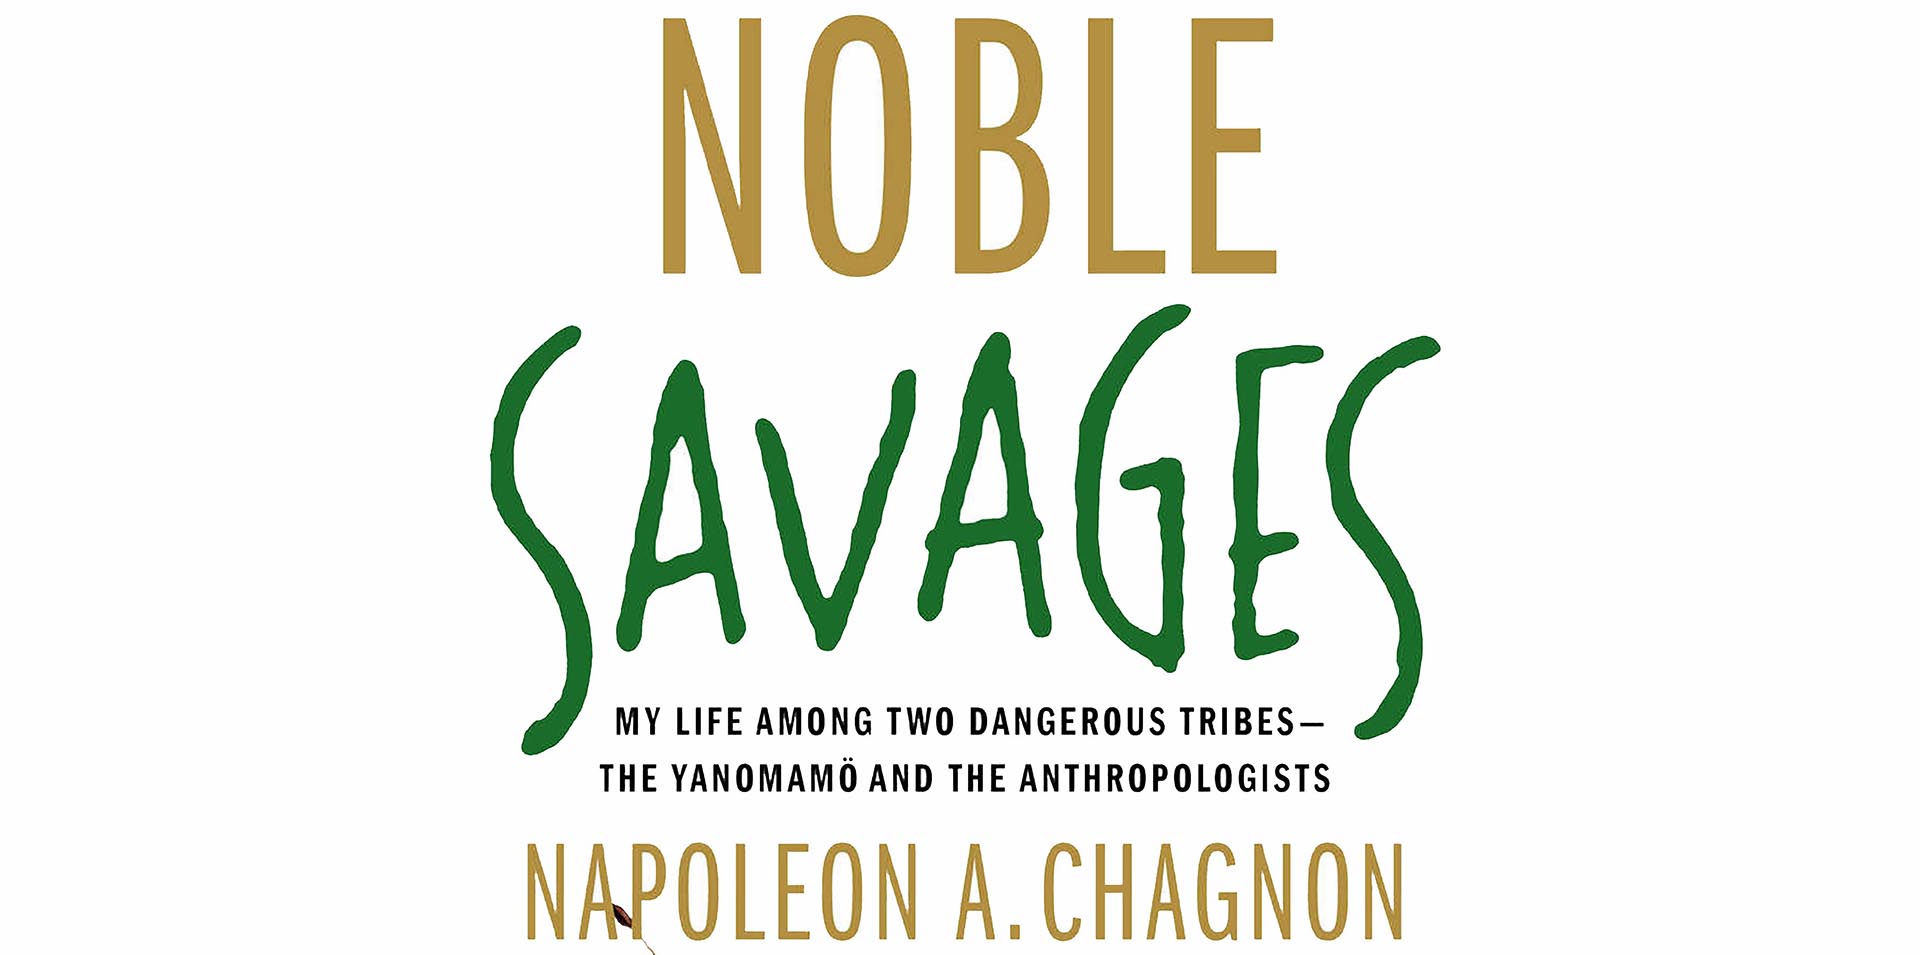 Book Cover of Napoleon Chagnon's 'Noble Savages: My Life Among Two Dangerous Tribes - The Yanomamö and the Anthropologists'